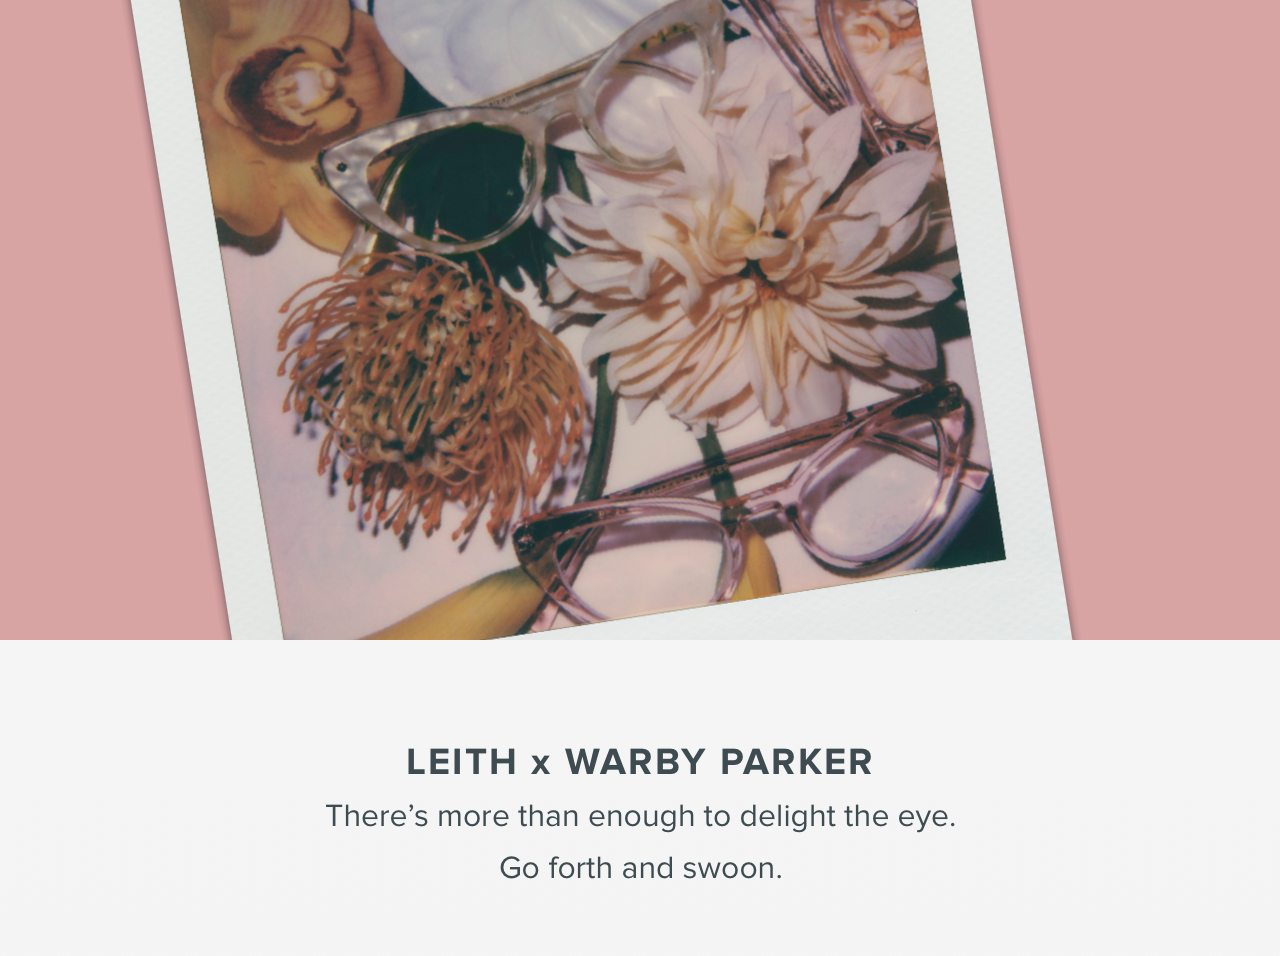 Leith x Warby Parker